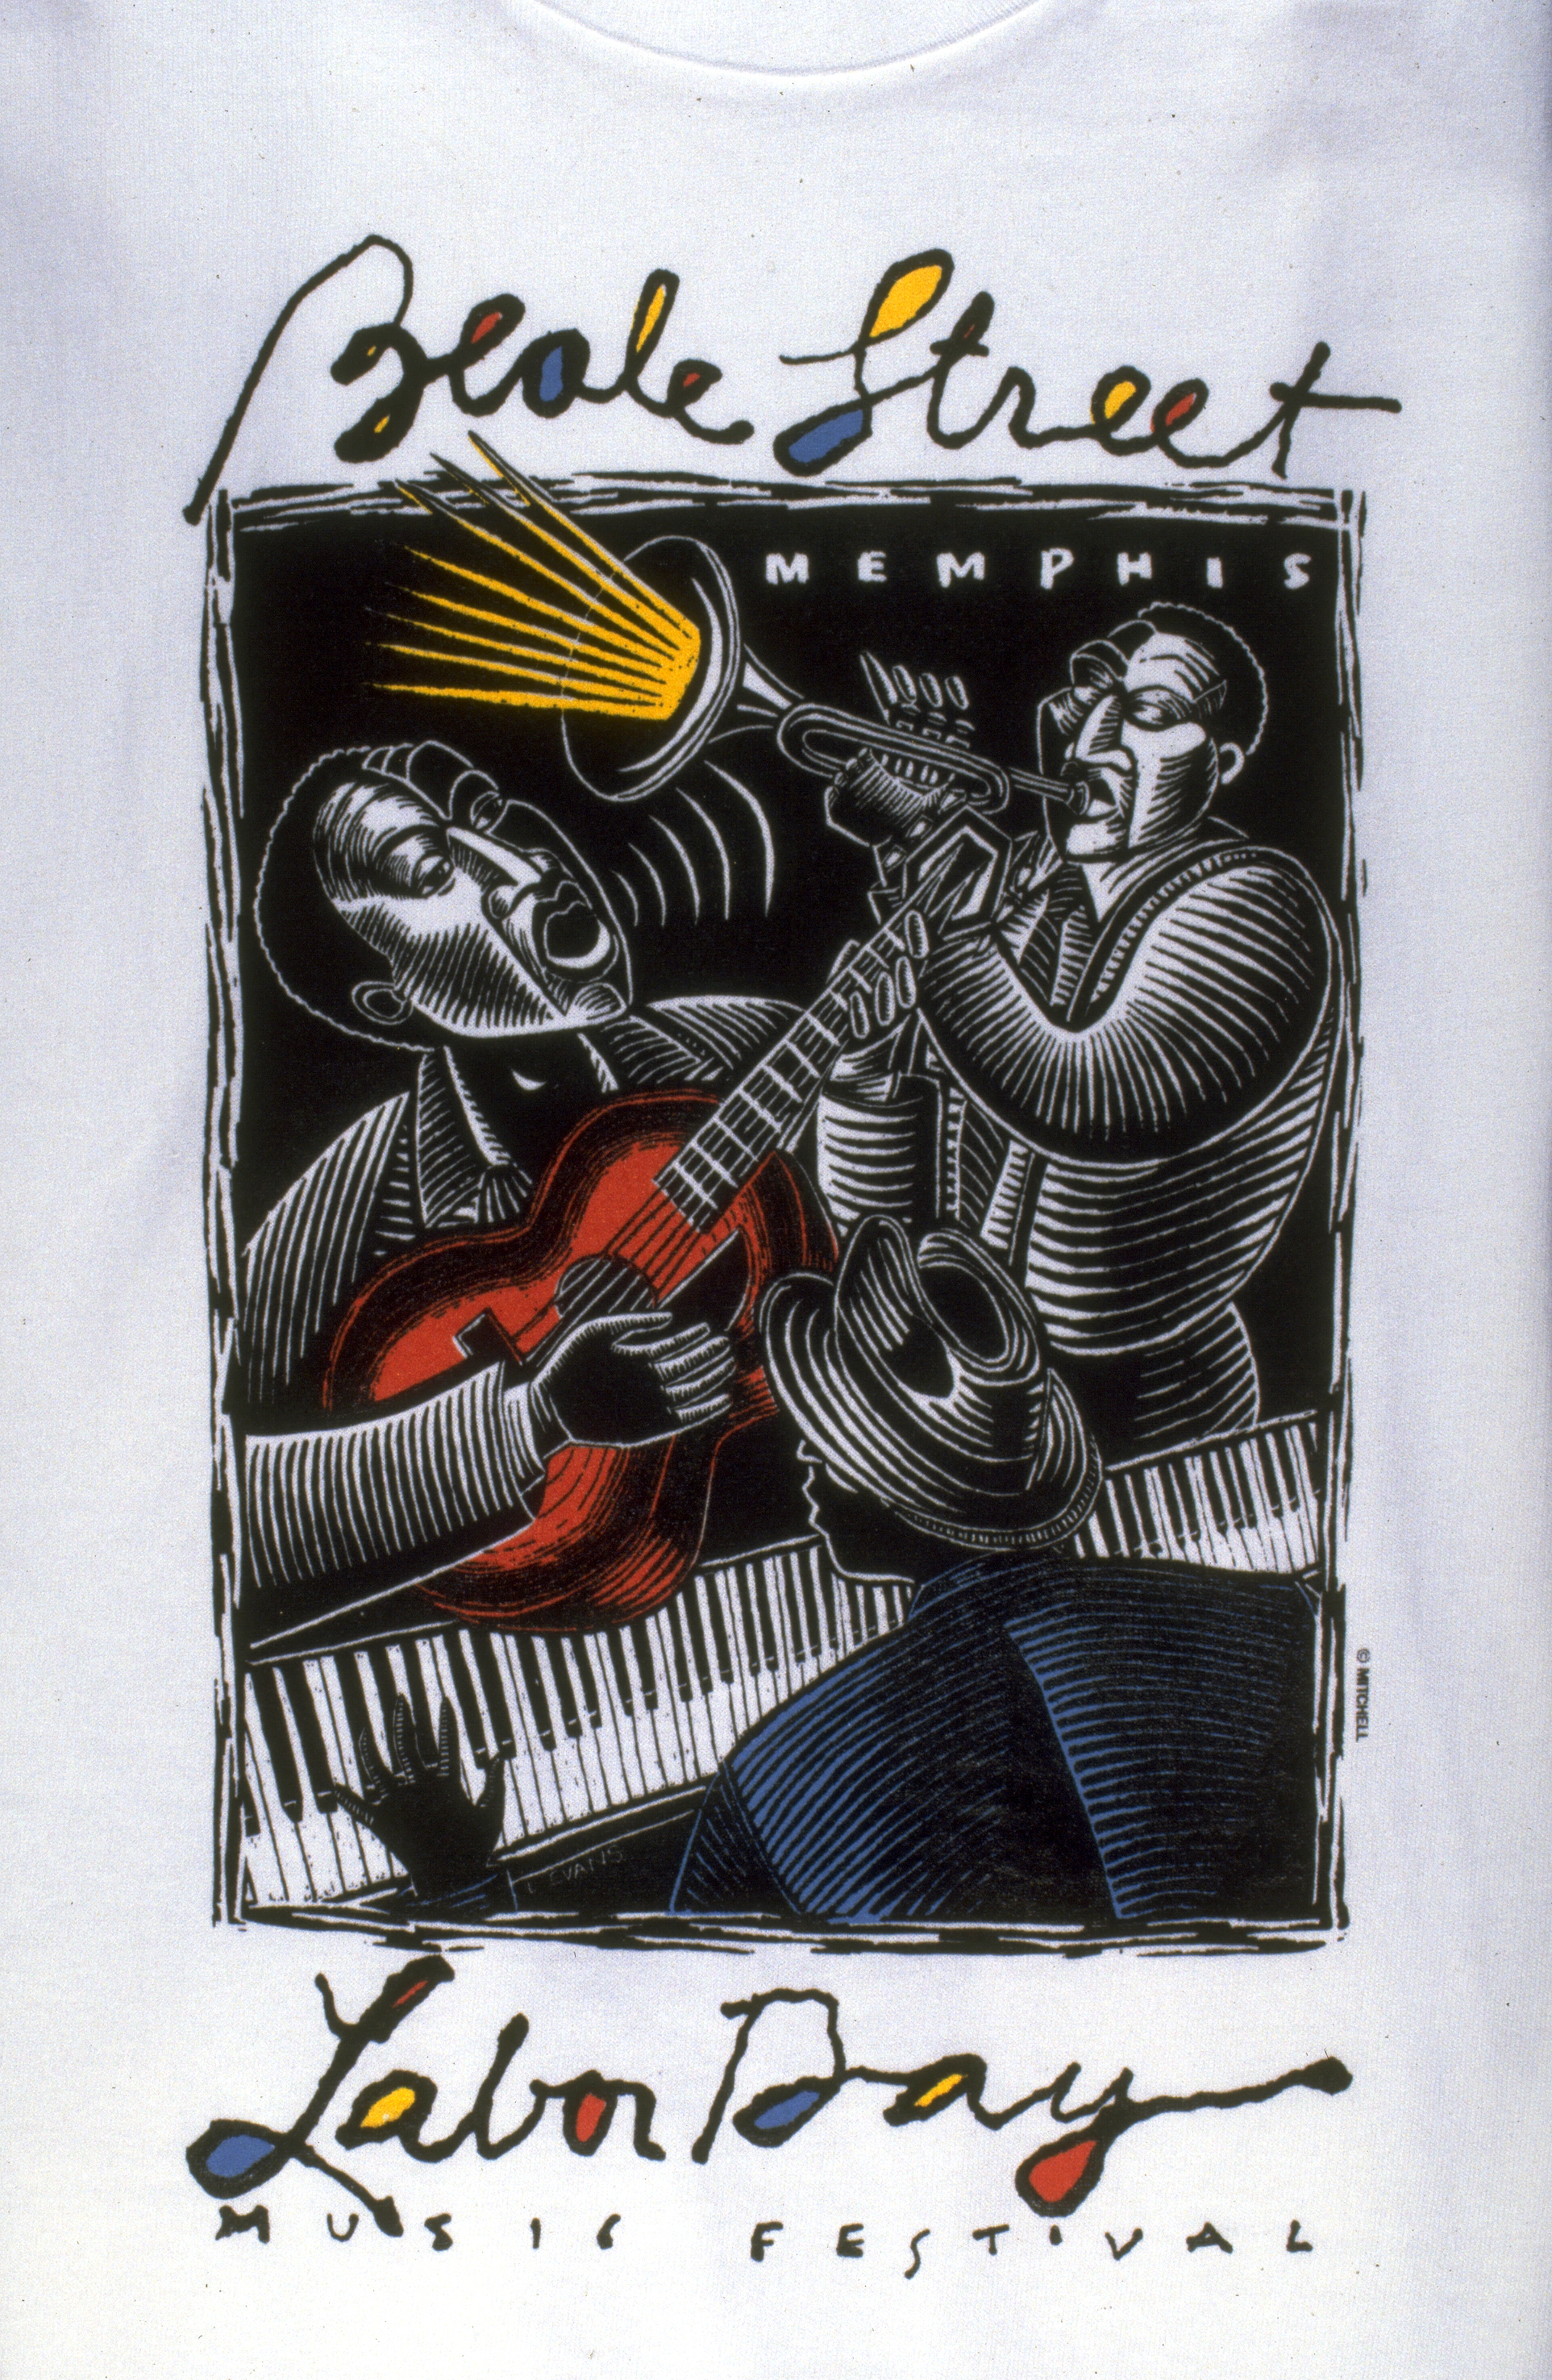  Beale Street Labor Day Music Festival design  Scratchboard illustration by Evans  © Chuck Mitchell. All rights reserved. 